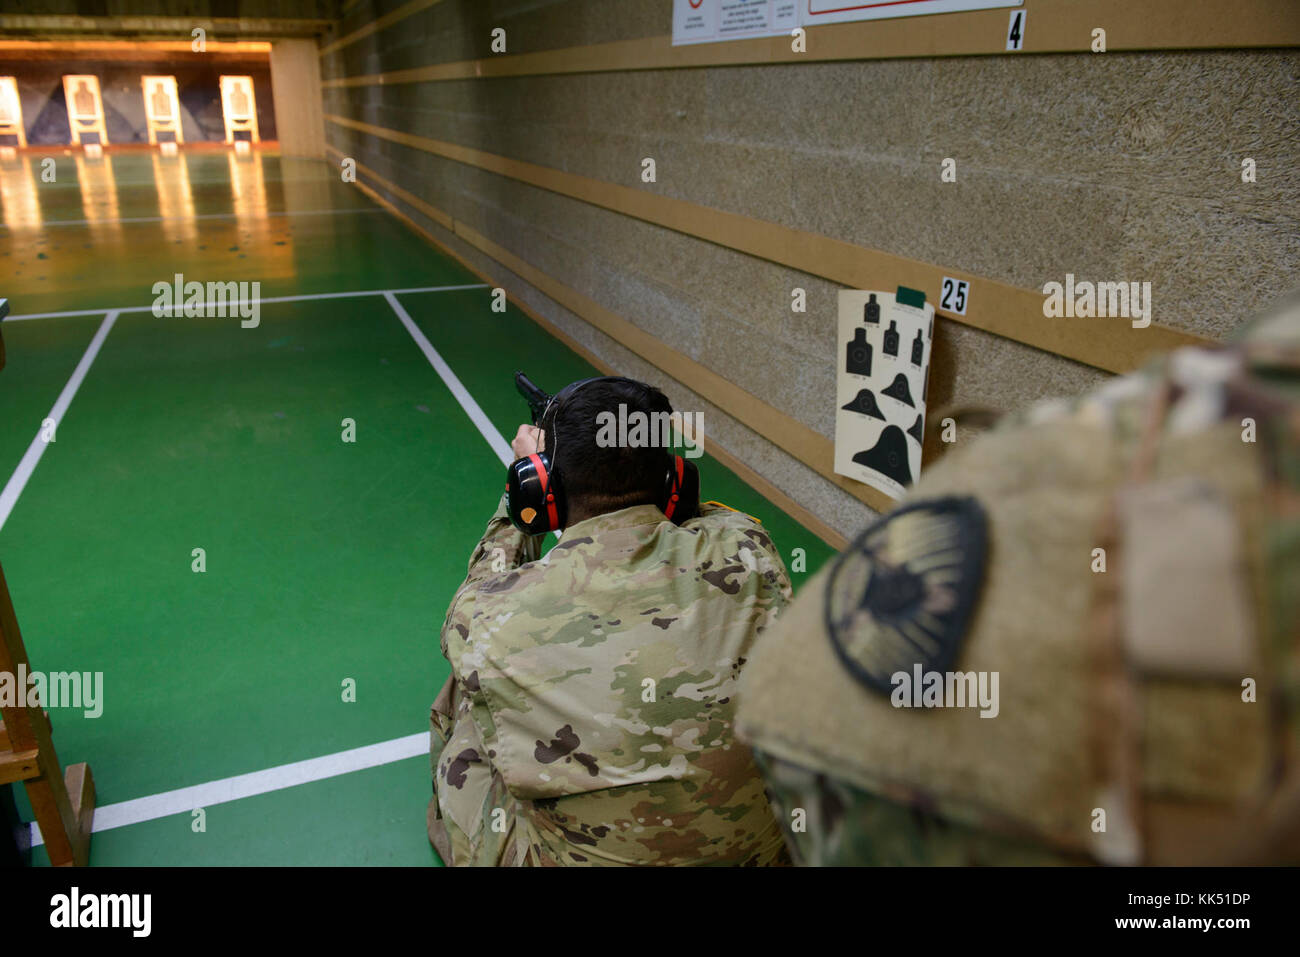 A U.S. Soldier with the 650th Military Intelligence Group acts as safety and oversees one of her peers who performs M9 pistol qualification at the Training Support Center Benelux 25-meter indoor range, on Chièvres Air Base, Belgium, Nov. 09, 2017. (U.S. Army photo by Visual Information Specialist Pierre-Etienne Courtejoie) Stock Photo